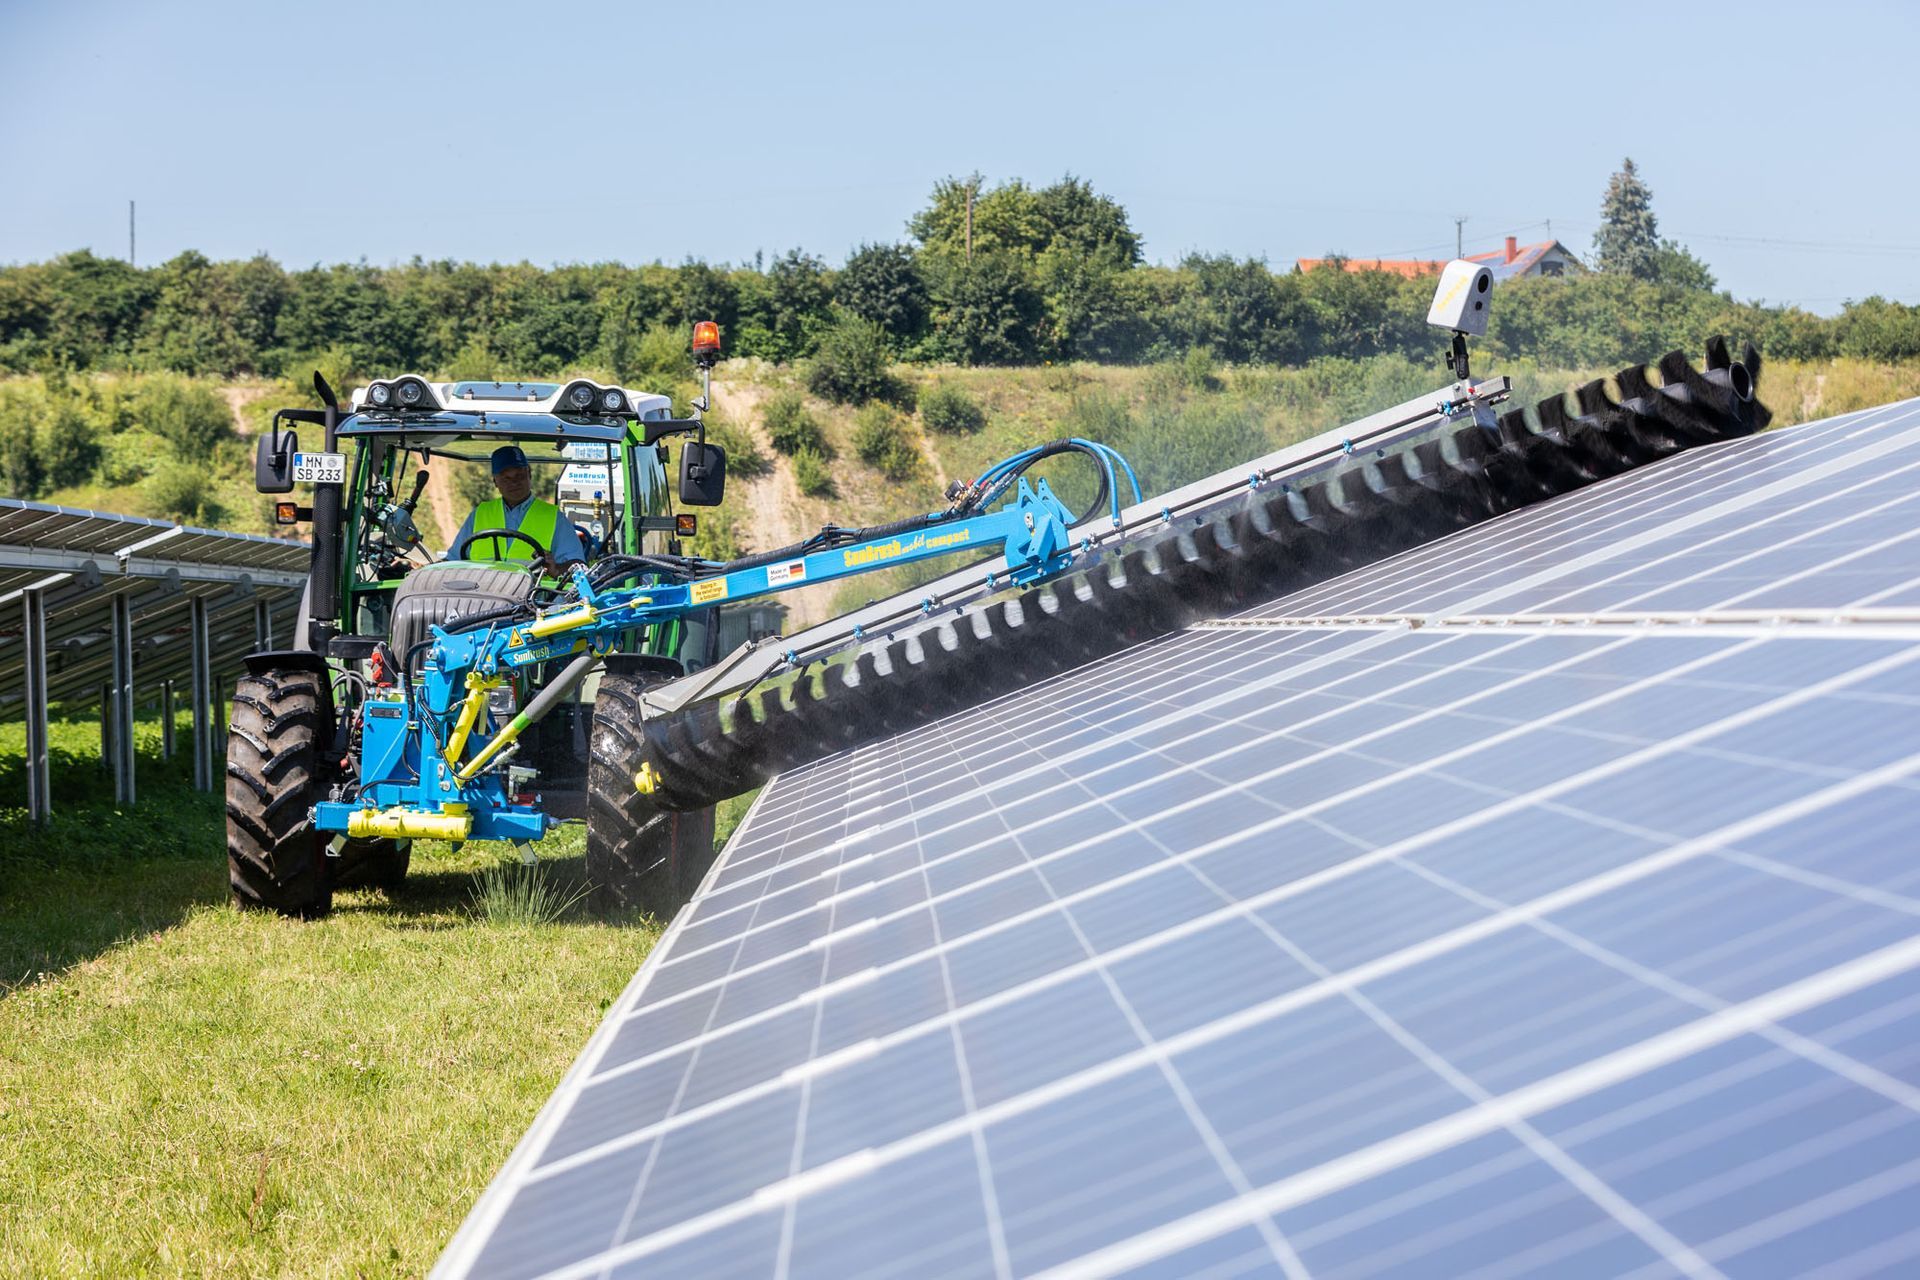 a tractor is cleaning solar panels with a machine .